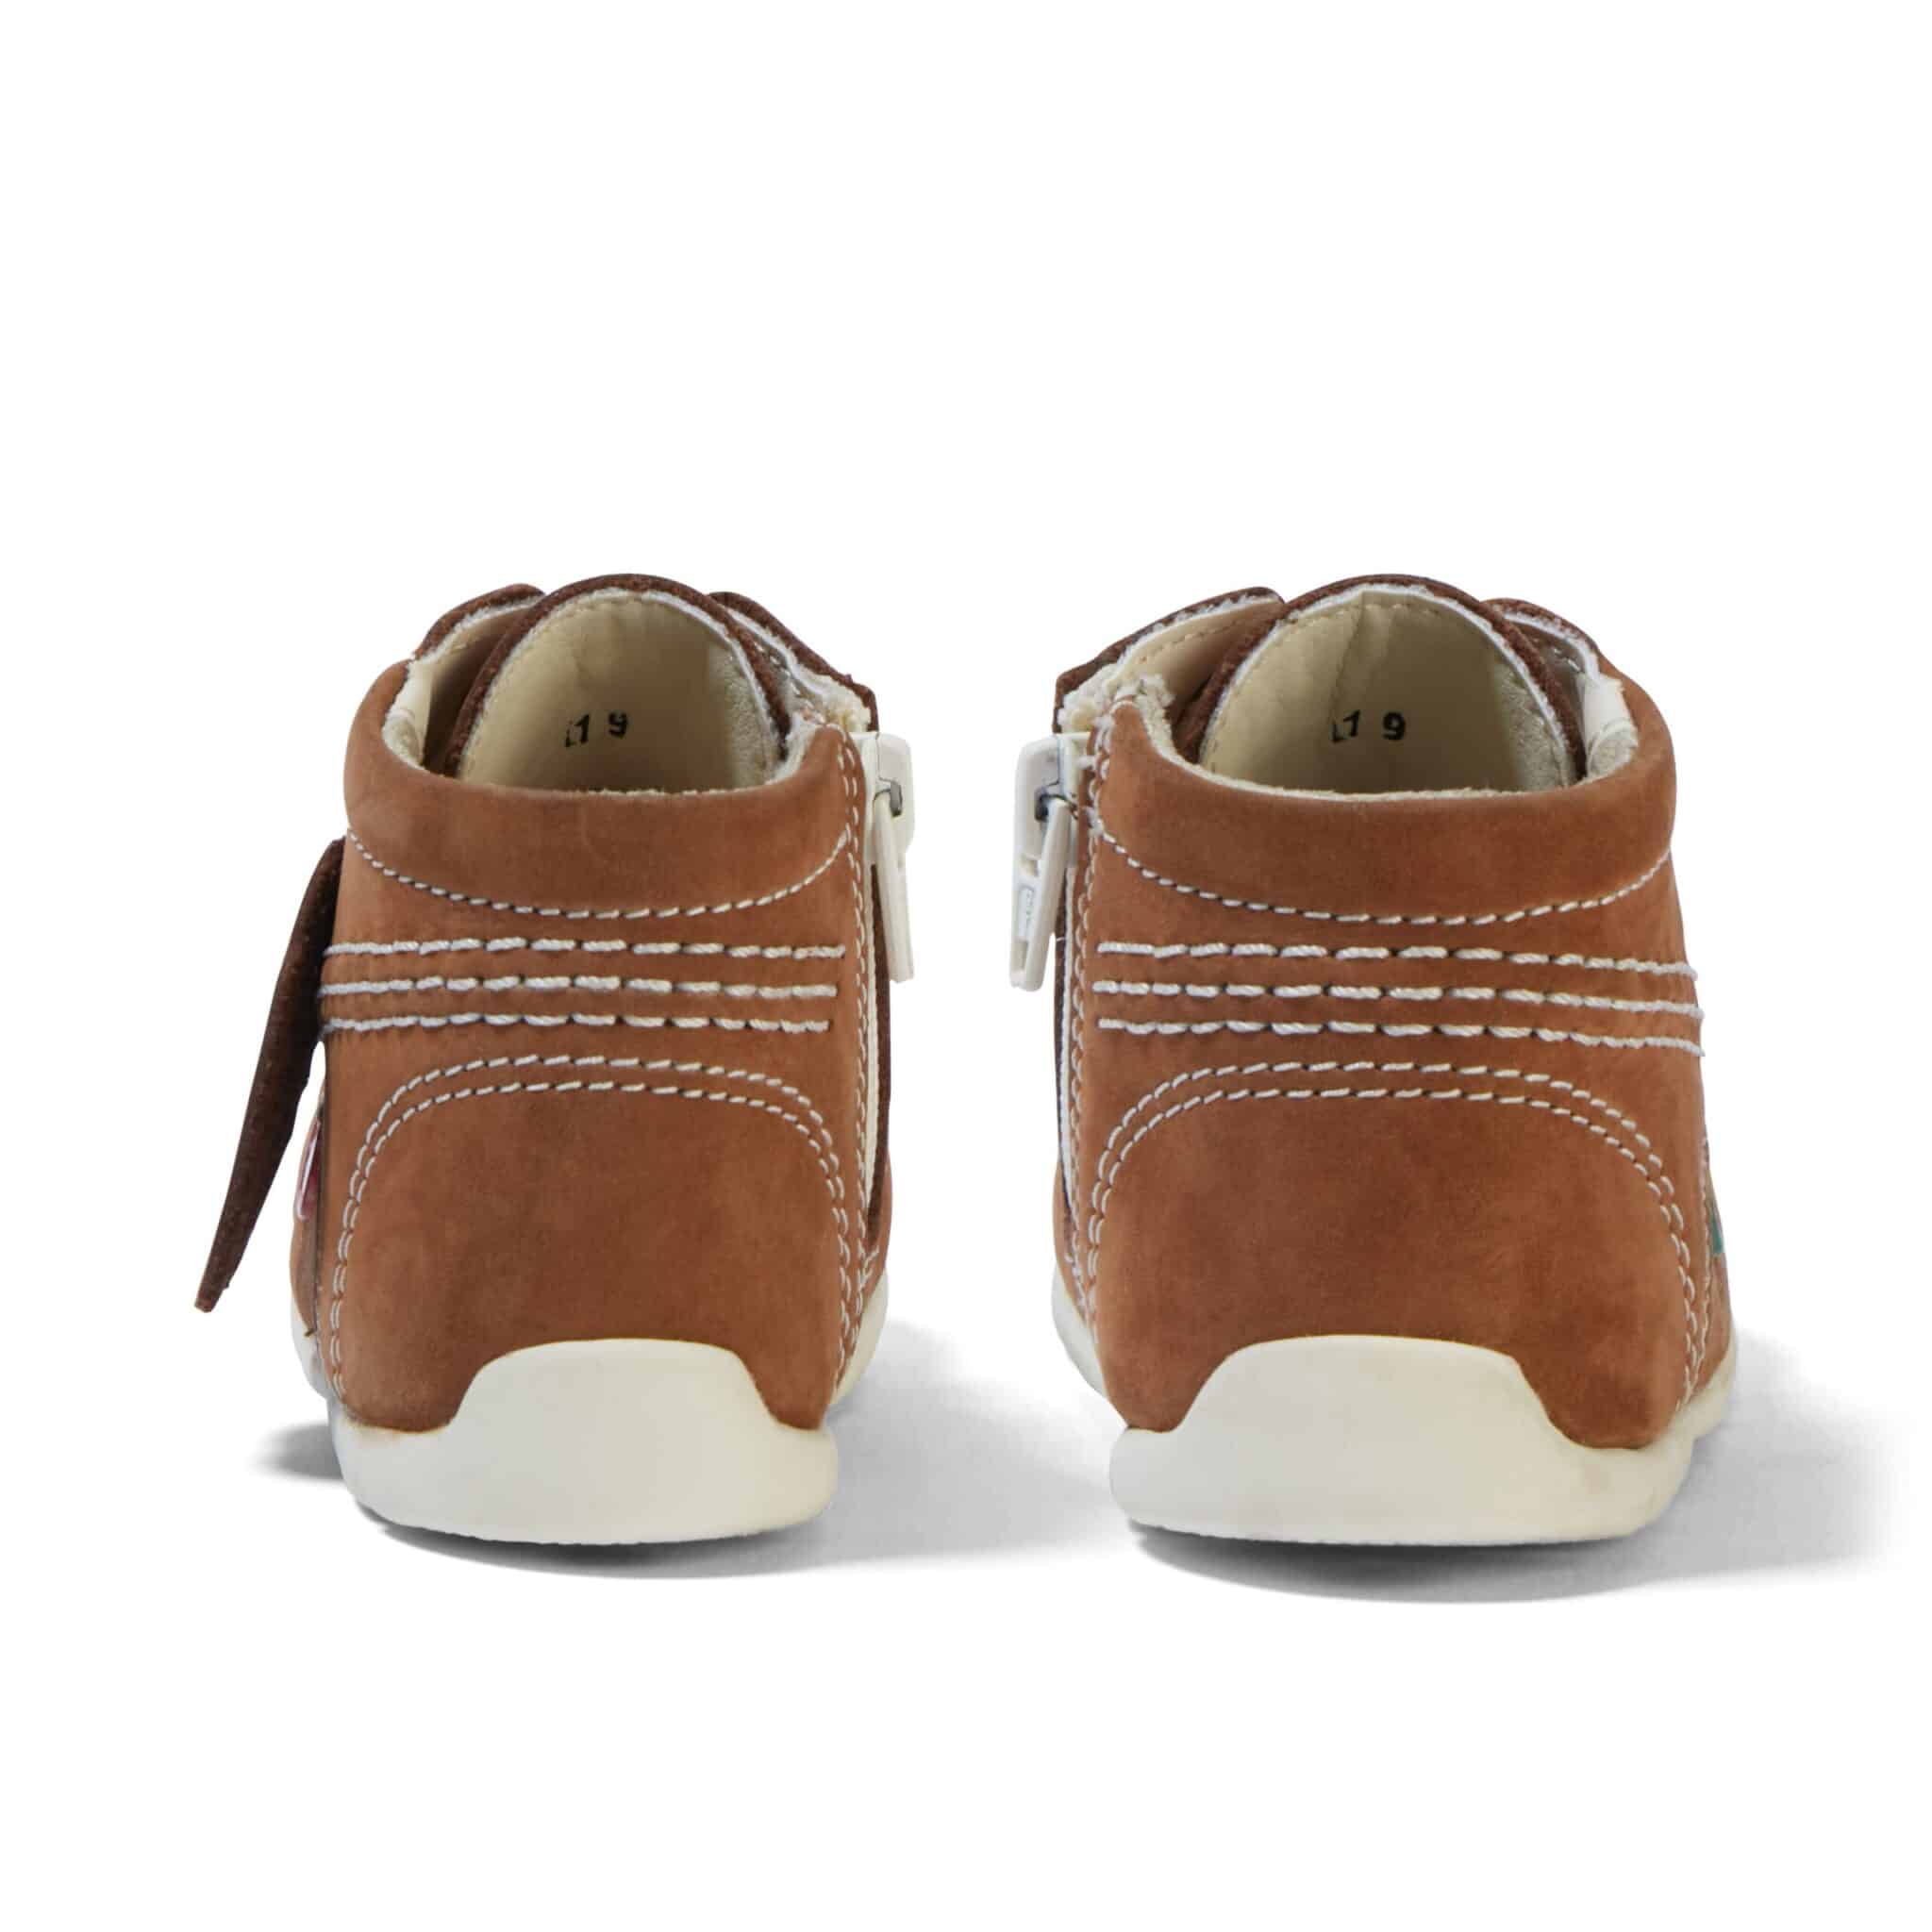 kickers boys brown shoe boots back view